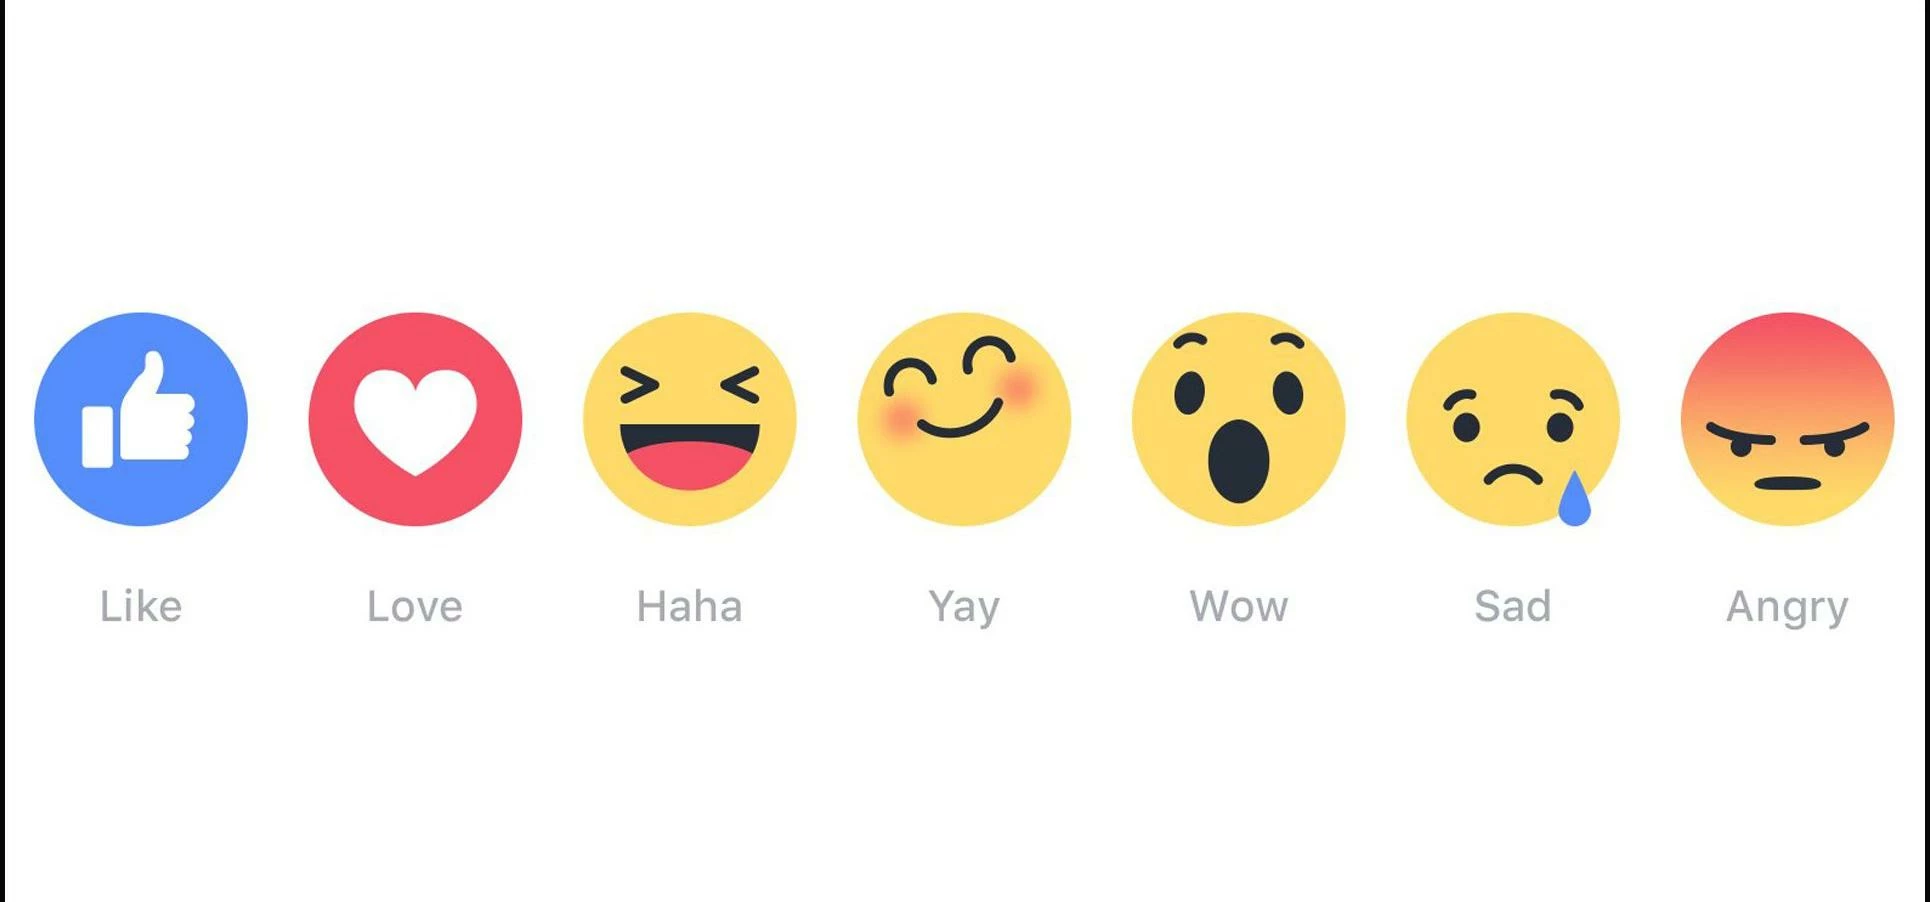 Facebook recently launched new reactions to compliment their existing 'like' function.